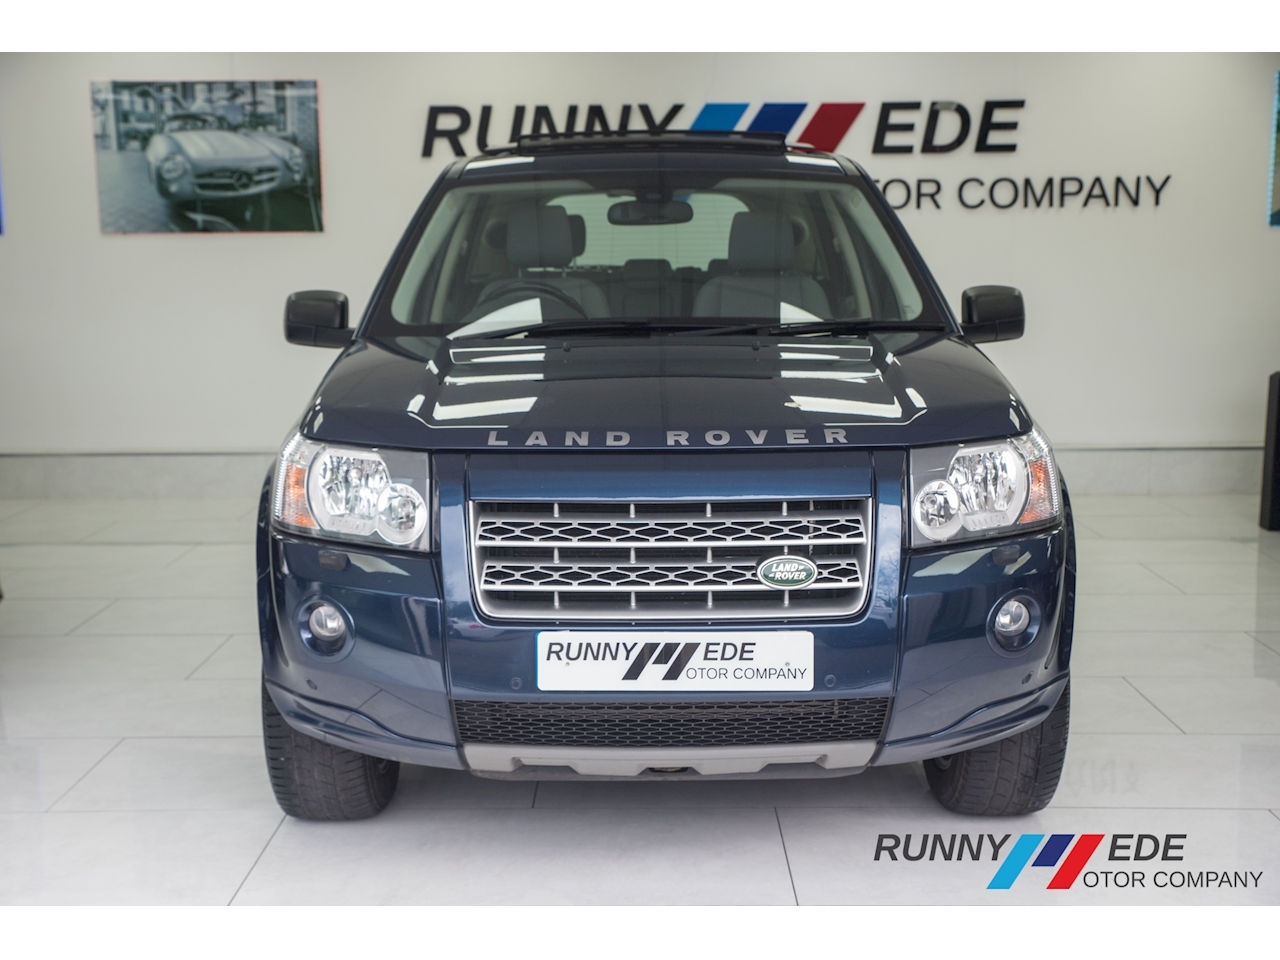 2.2 TD4 HSE SUV 5dr Diesel Auto 4WD (160 ps)